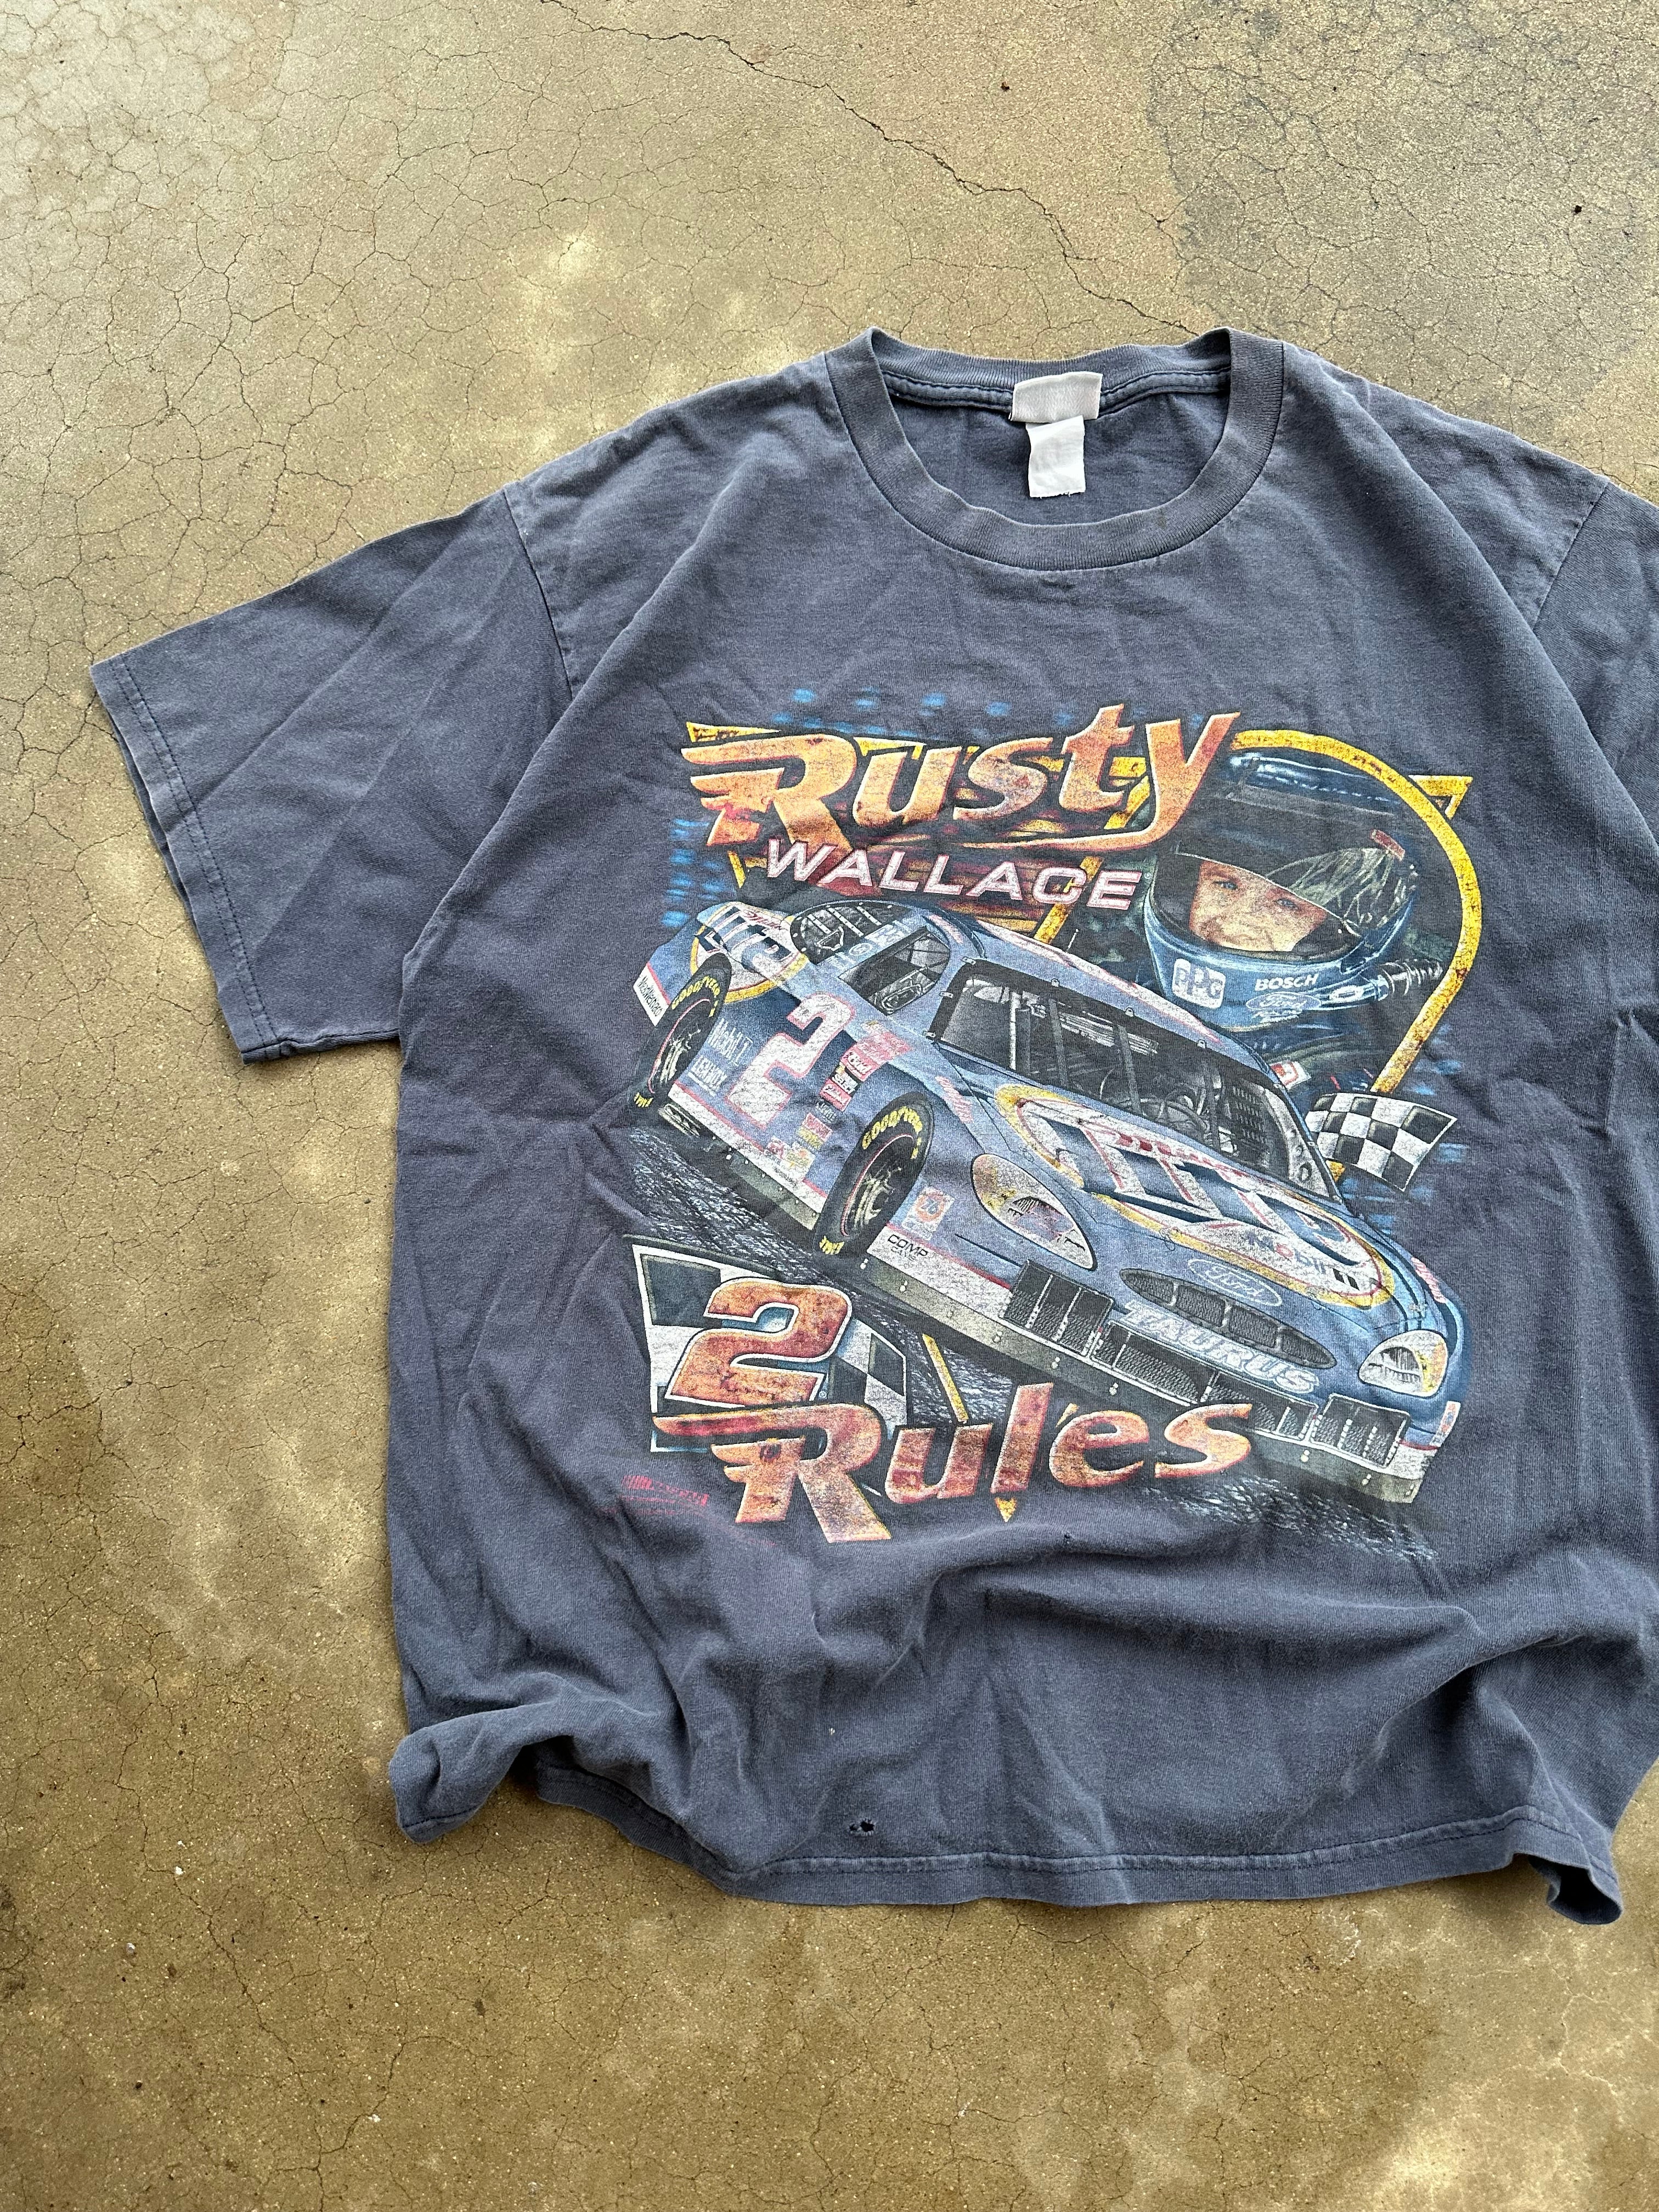 Vintage Faded/Thrashed Rusty Wallace T-Shirt